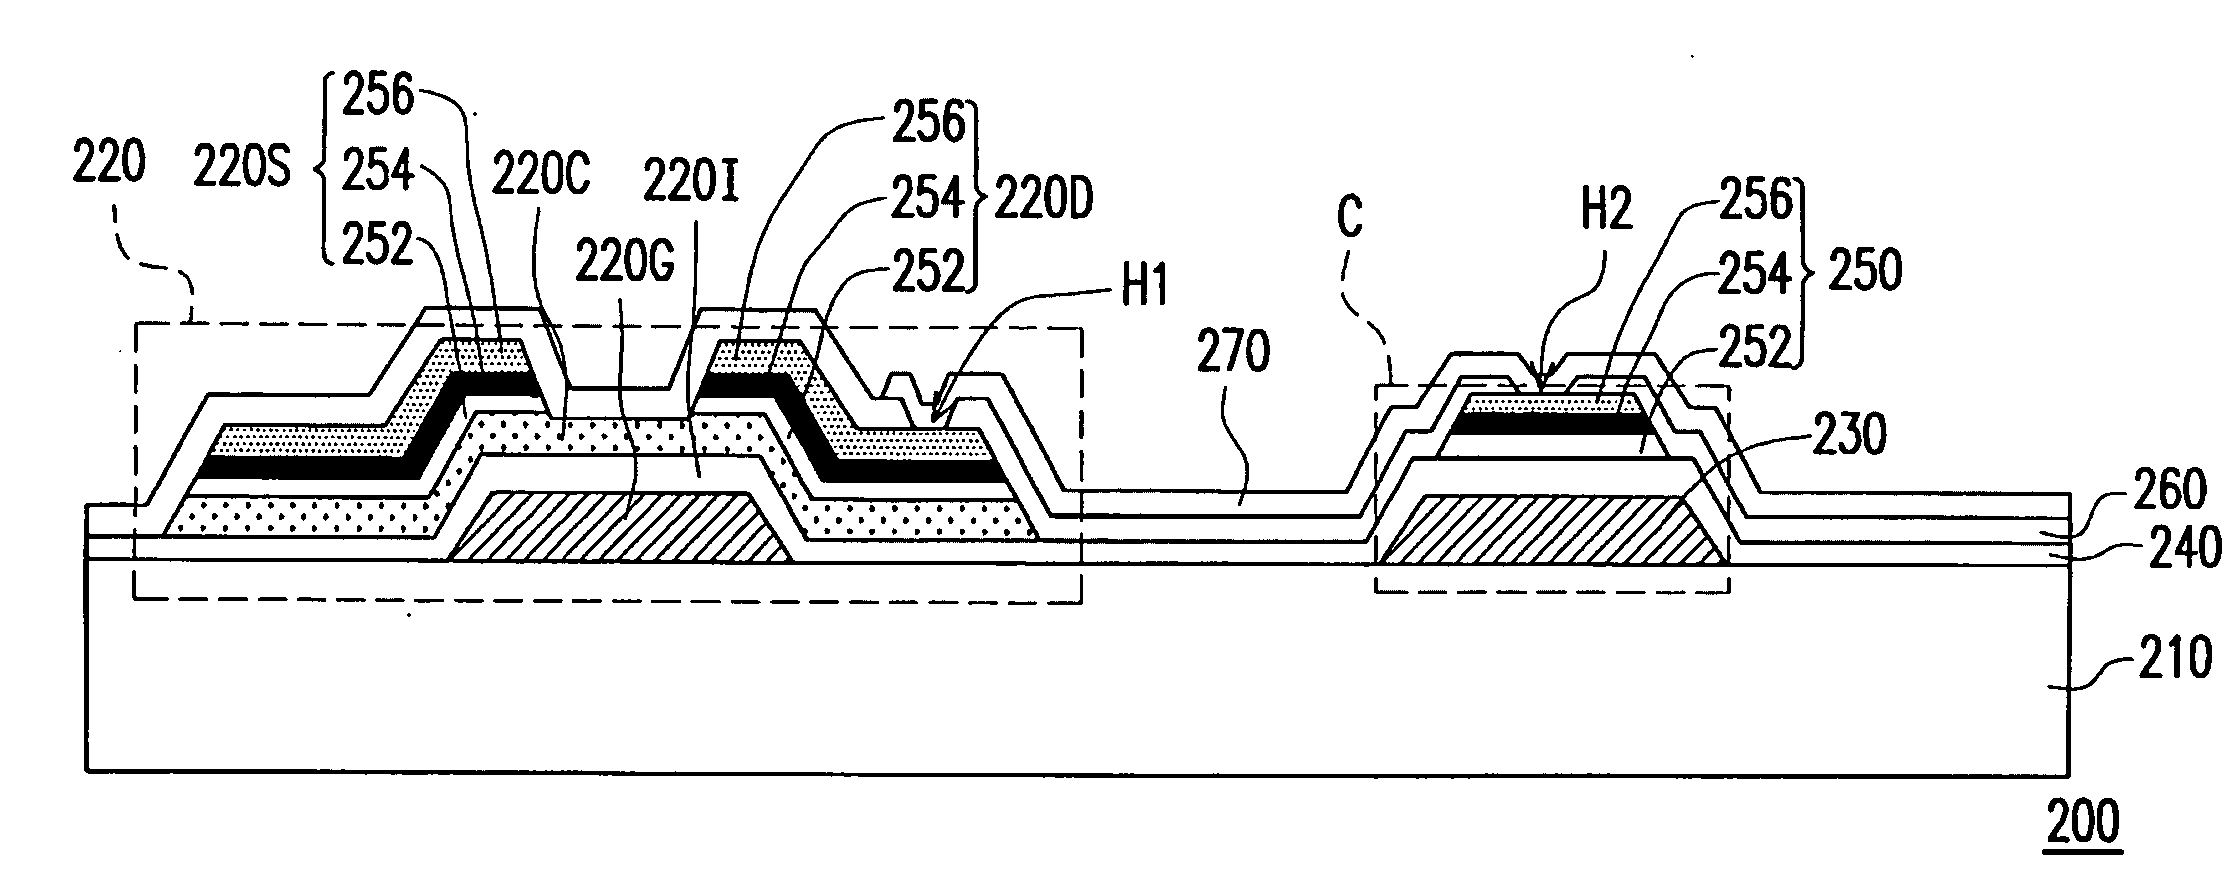 Pixel structure, display panel, eletro-optical apparatus, and method thererof